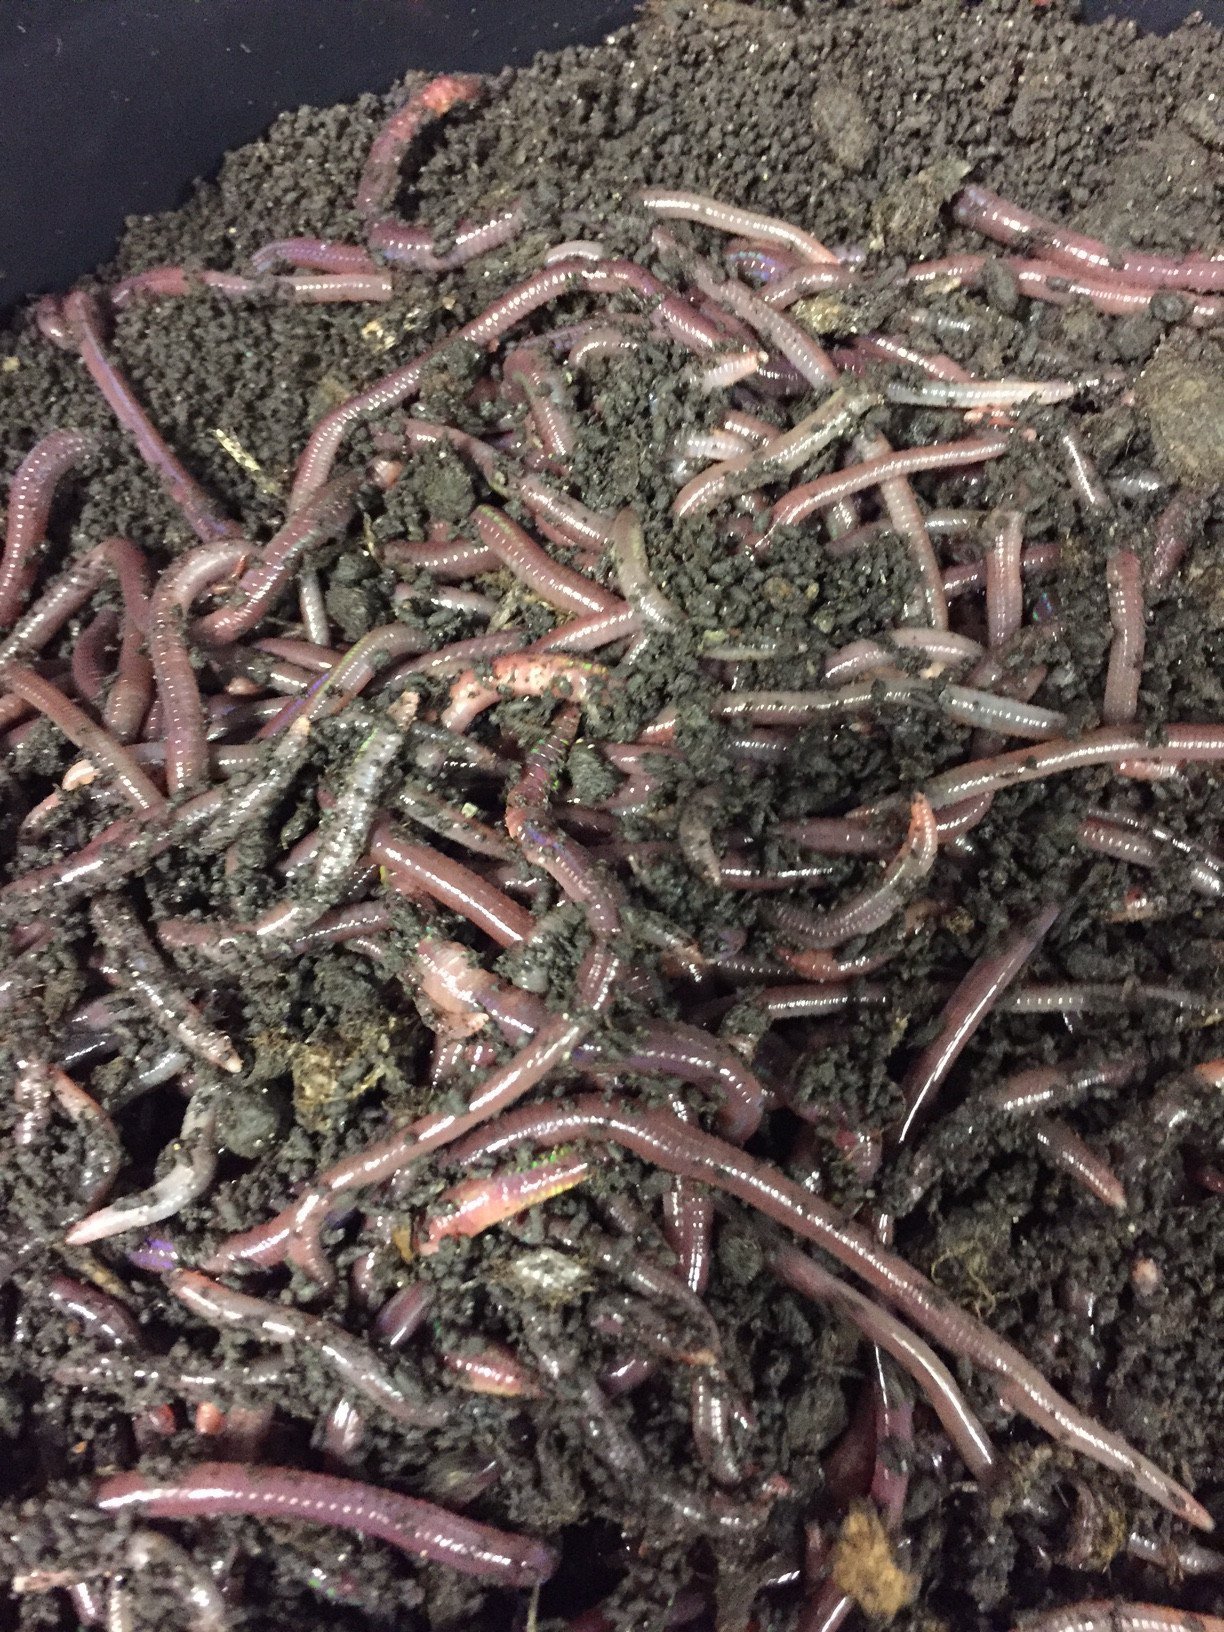 Worms for Sale -1lb - African Nightcrawlers- Buy Earthworms - Simple Grow